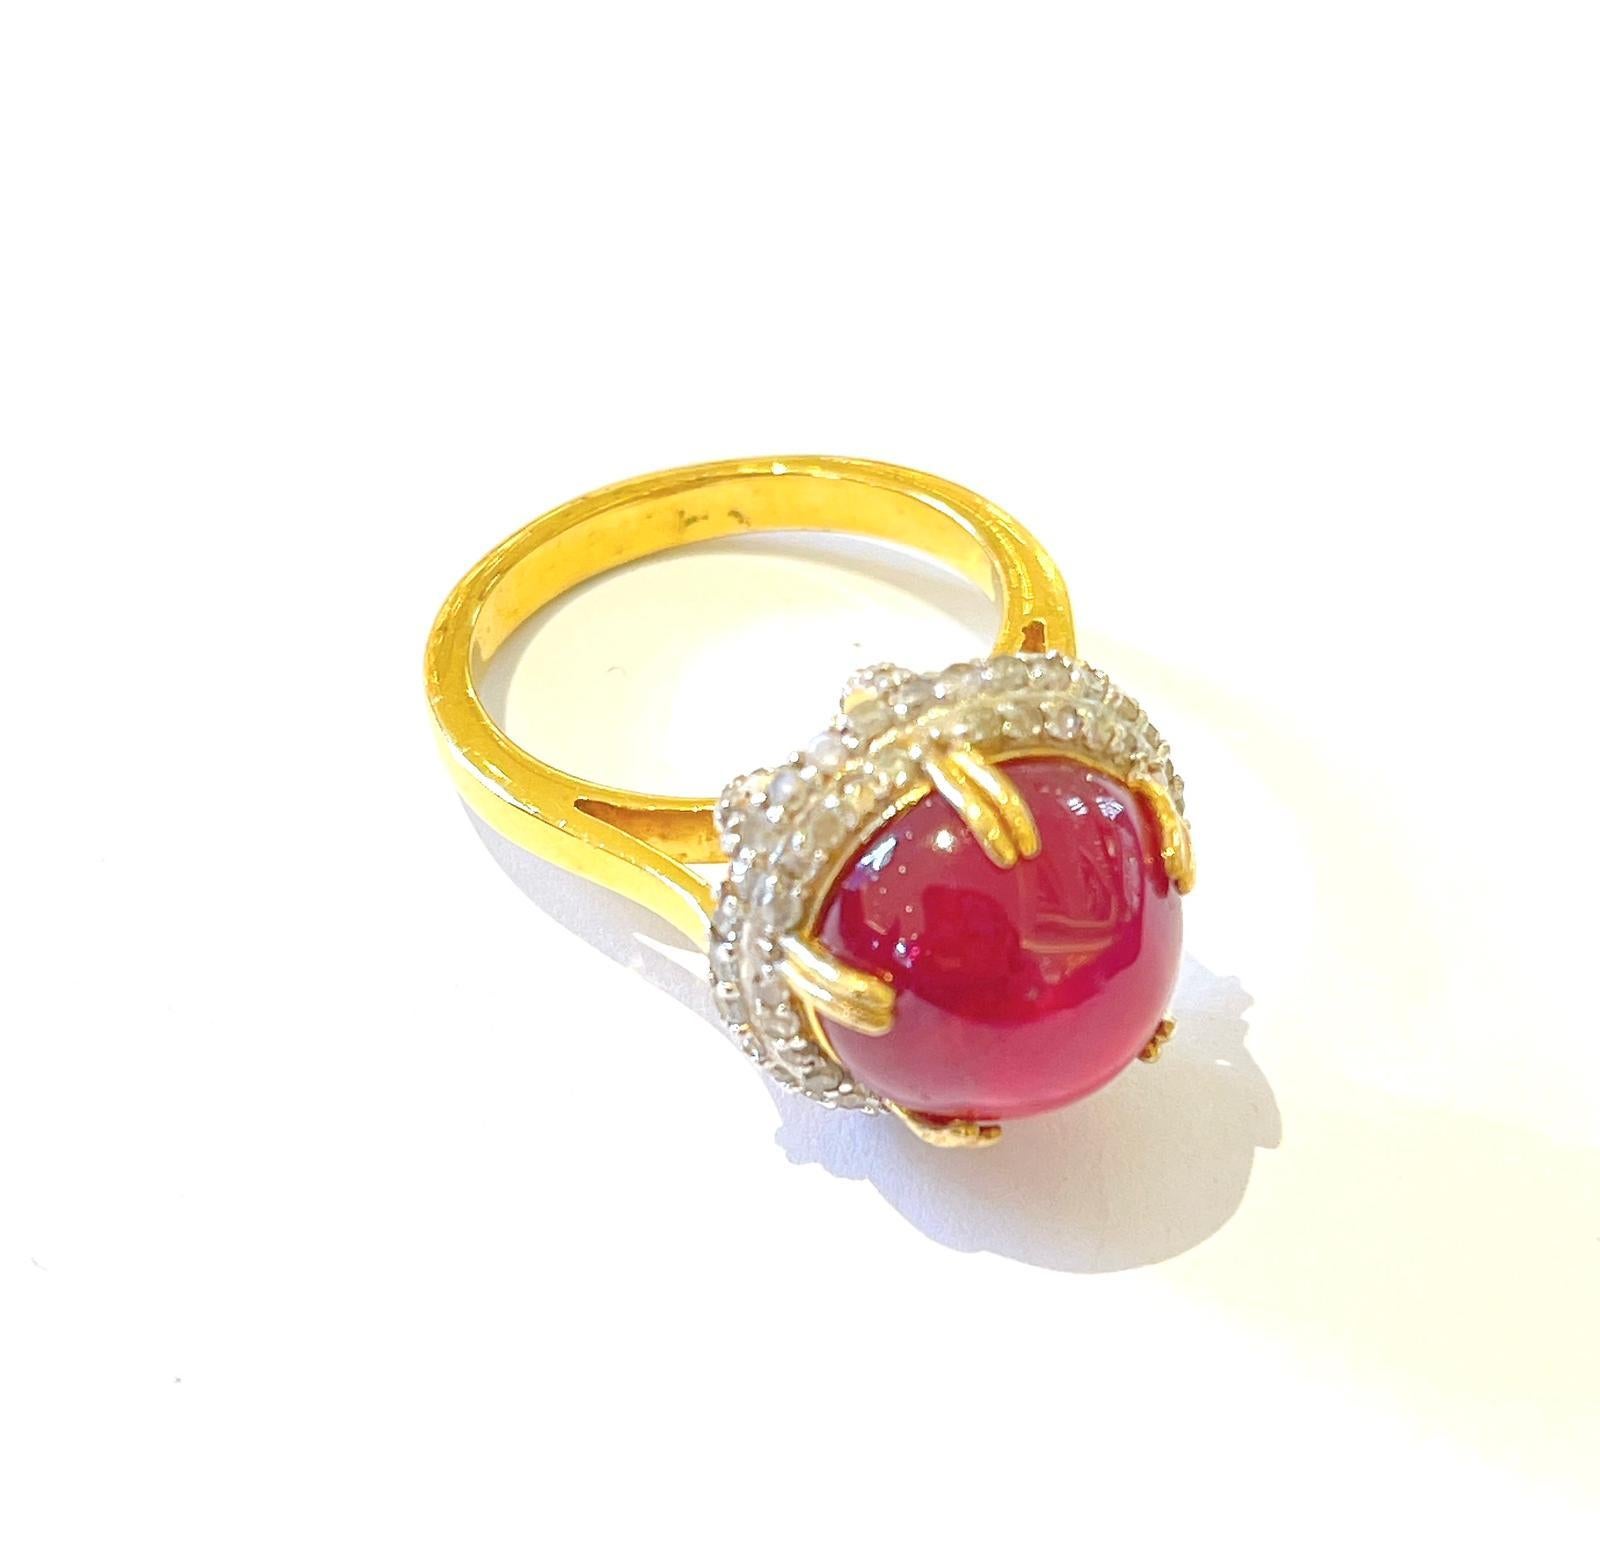 Bochic “Capri” Red Ruby & Diamond Cocktail Ring Set In 18K Gold & Silver 

Red Natural Ruby Cabochon - 14 Carats 
White Natural Diamonds - 1.50 Carat 

This Ring is from the 